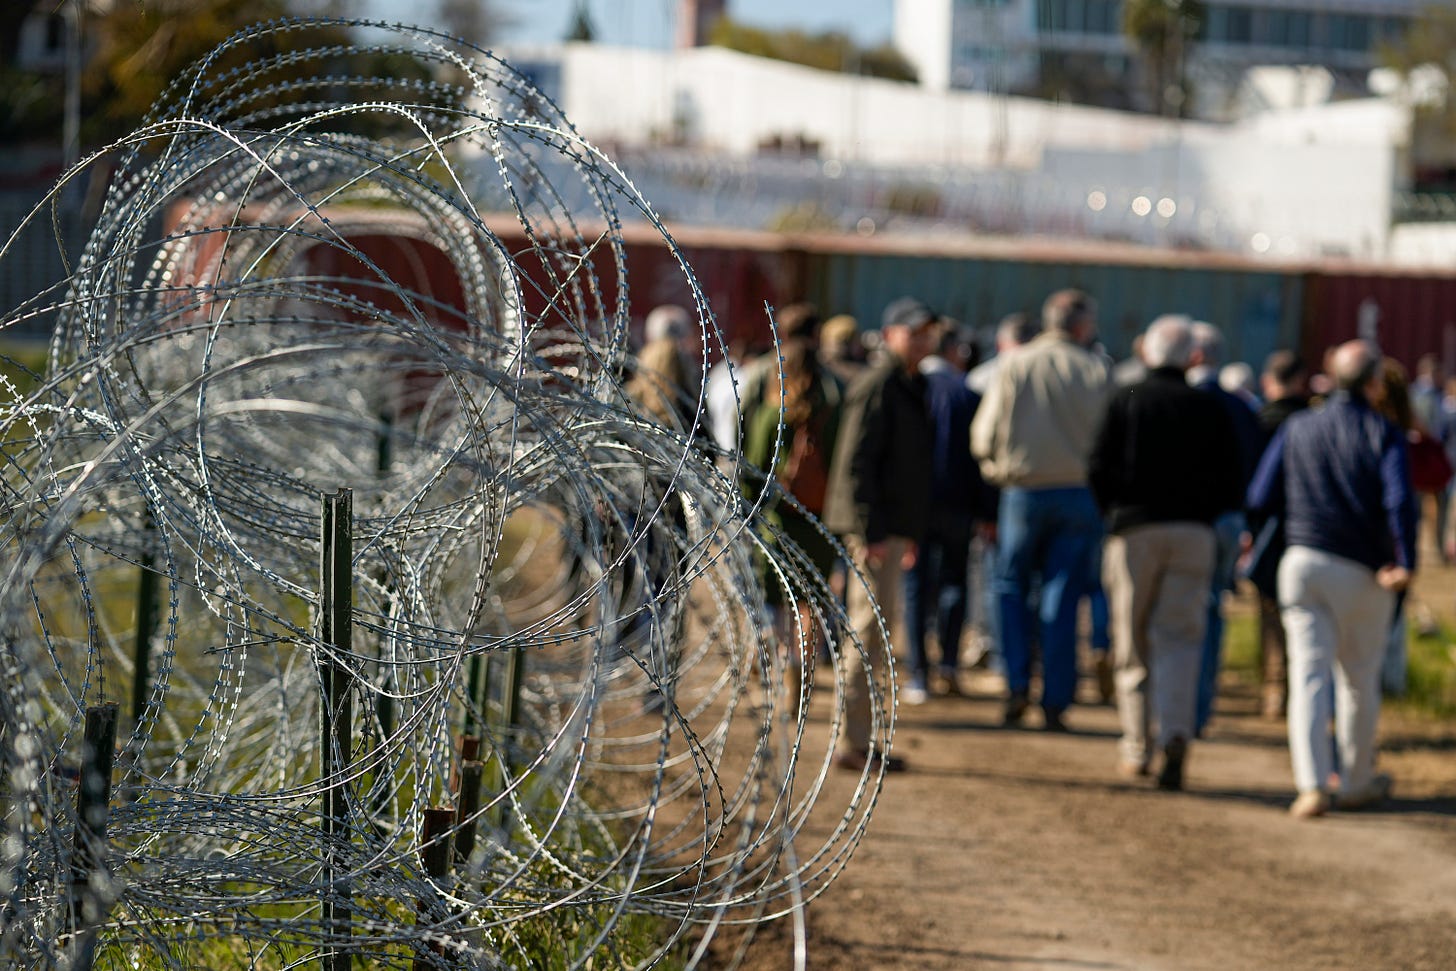 Concertina wire lines a dirt path as members of Congress walk past during a tour near the Texas-Mexico border